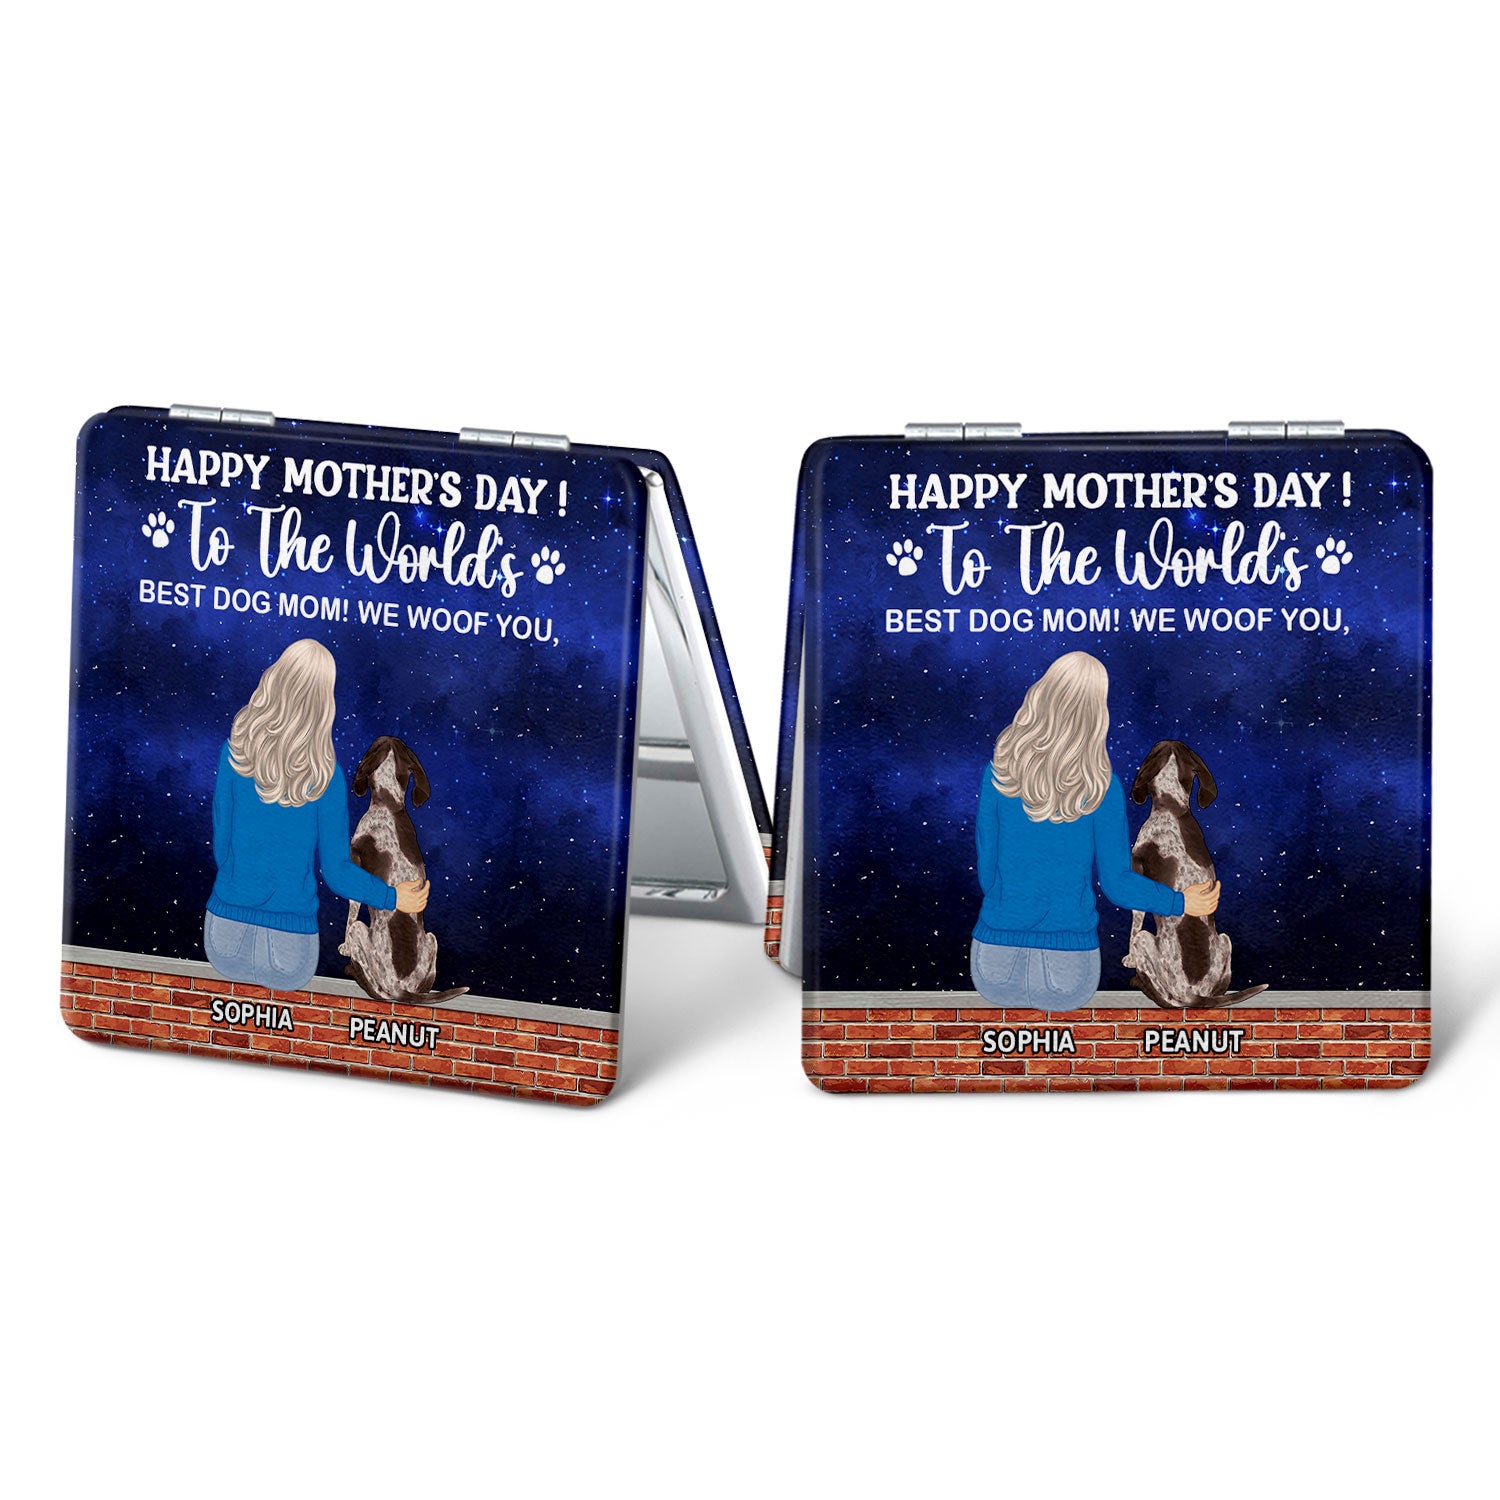 To The World's Best Dog Mom - Gift For Dog Lovers, Dog Mom - Personalized Square Compact Mirror